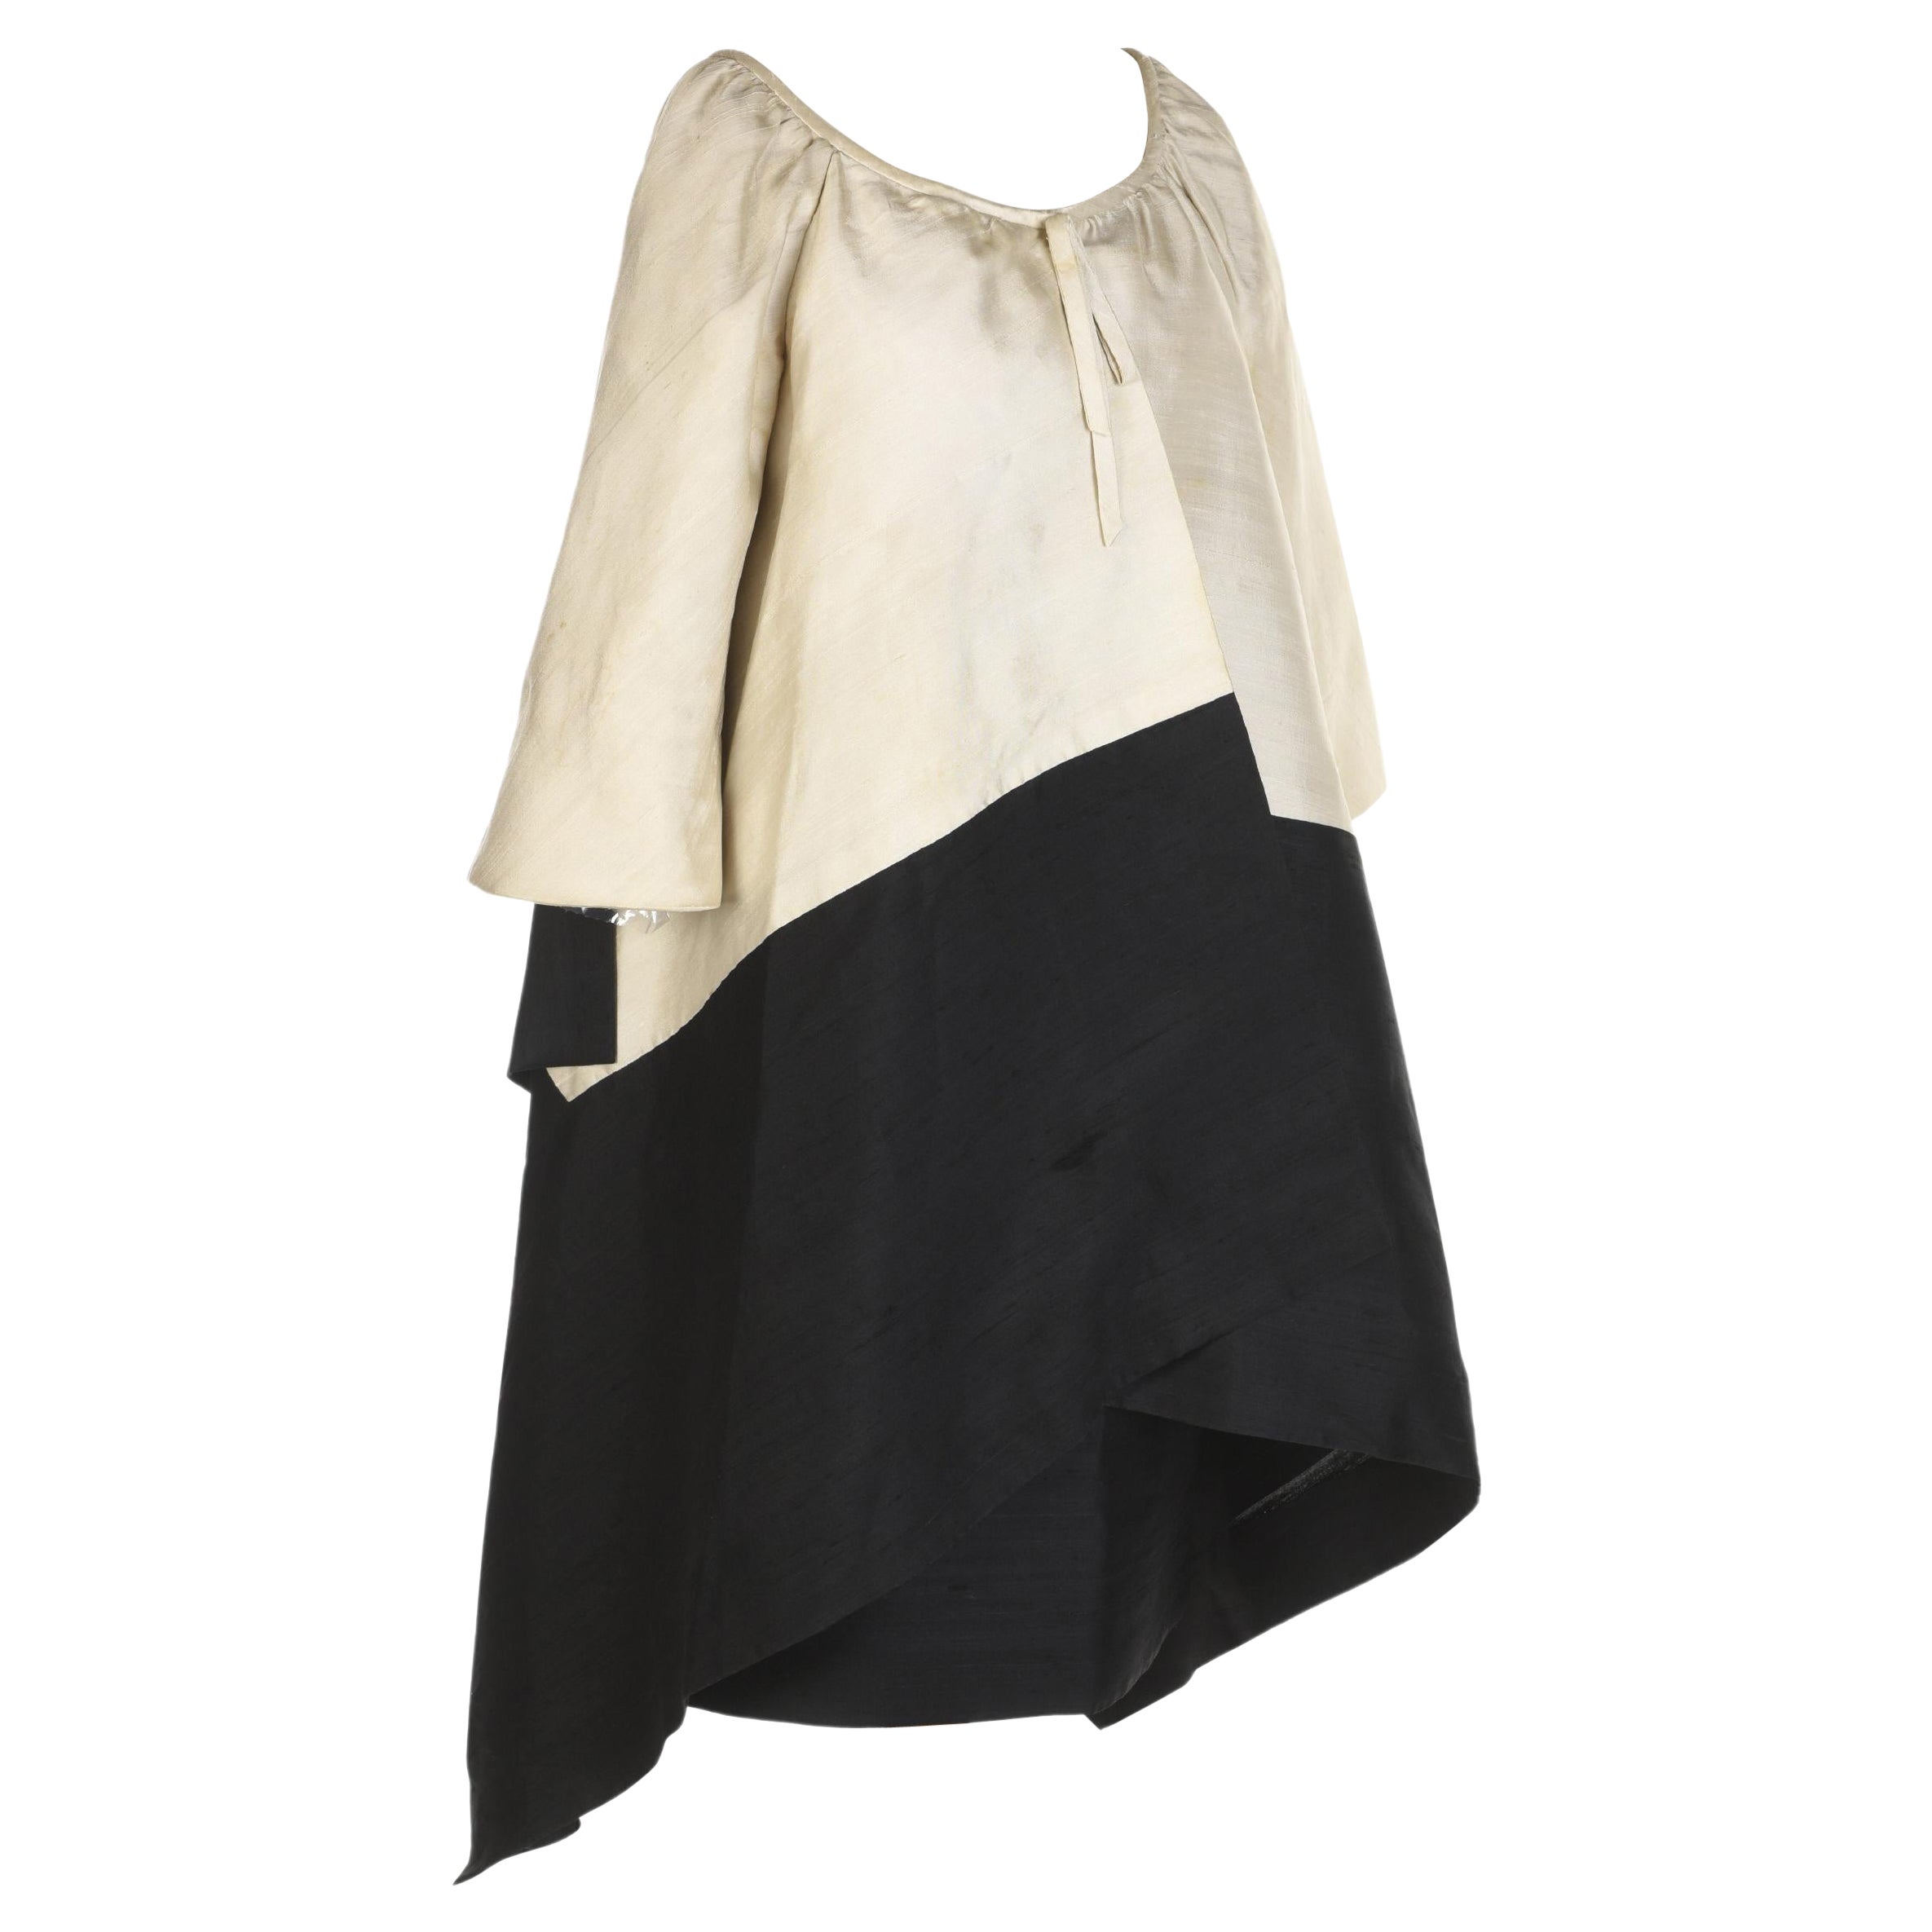 An Hubert de Givenchy French Couture Cream and Black silk Evening Set Circa 1965 For Sale